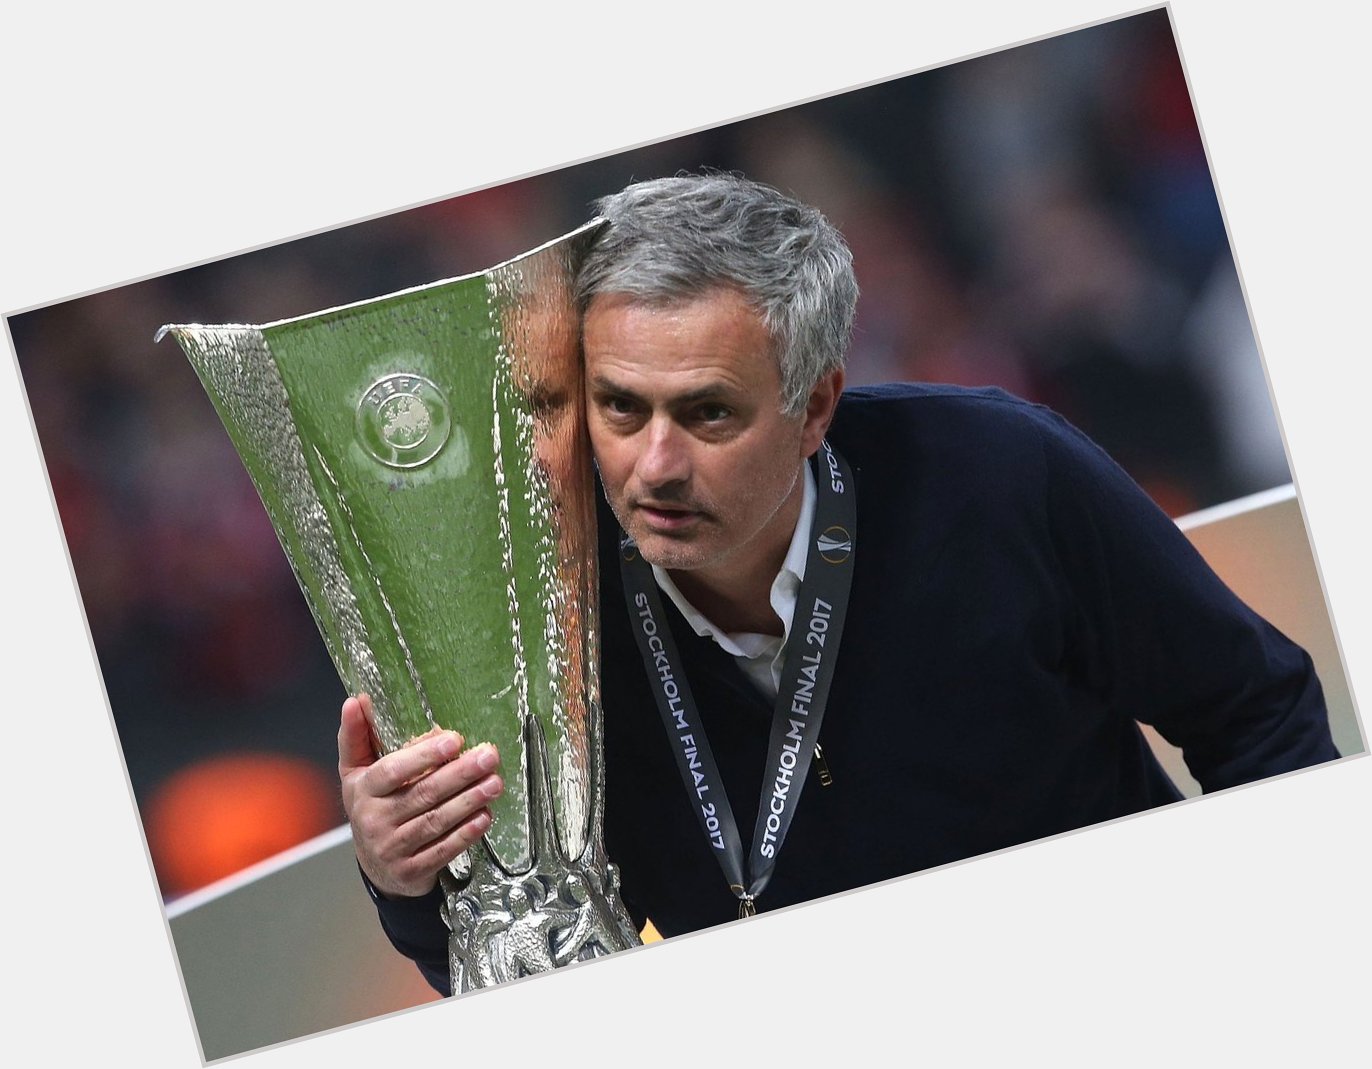 For the Europa League
For the 17/18 season
For loving my club when with us
Happy Birthday Jose Mourinho  